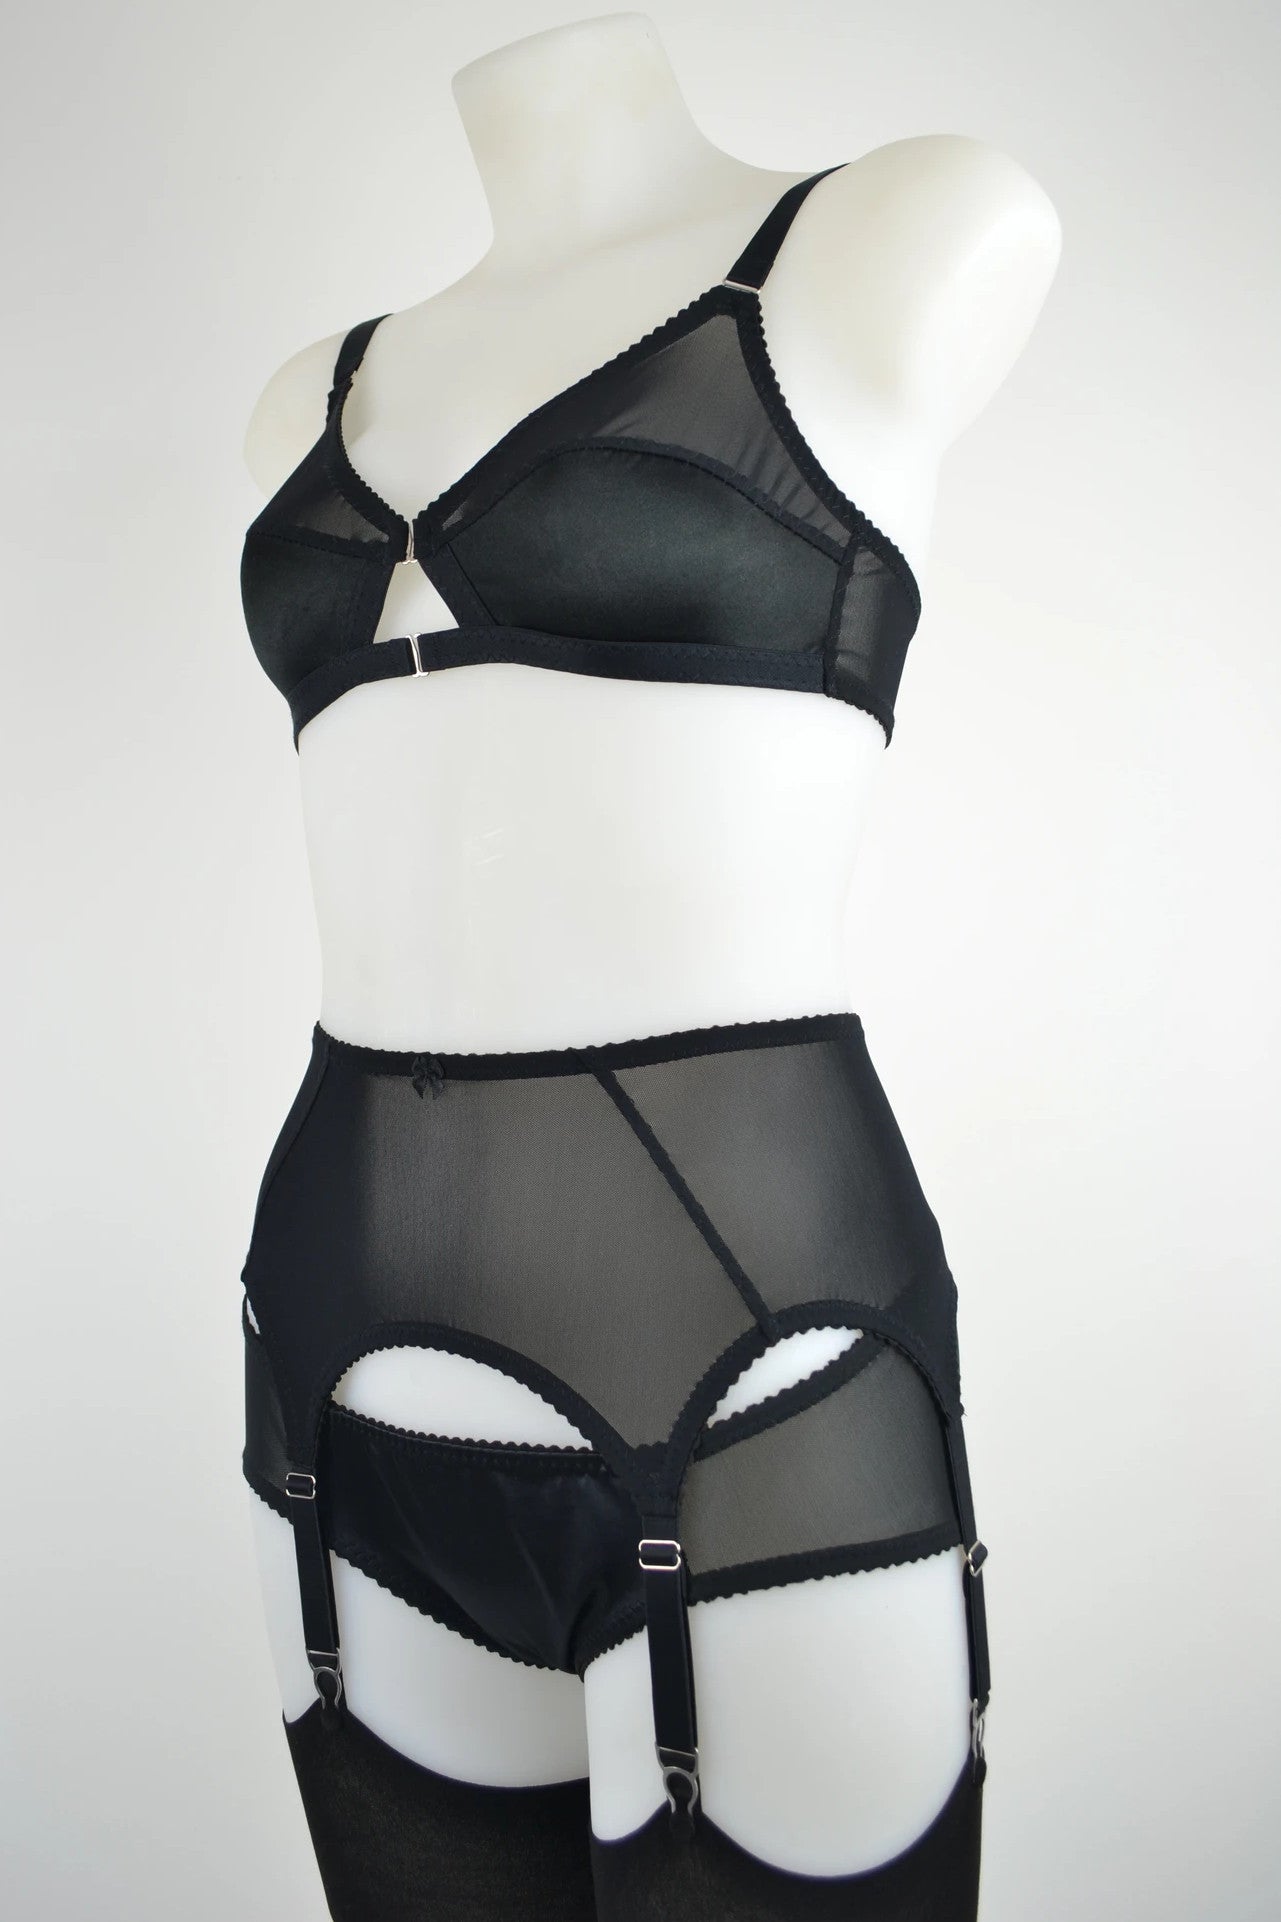 SHEER BLACK classic 6 strap metal clip suspender garter belt made in the uk available in plus size by pip and pantalaimon. Transgender non-binary underwear and lingerie